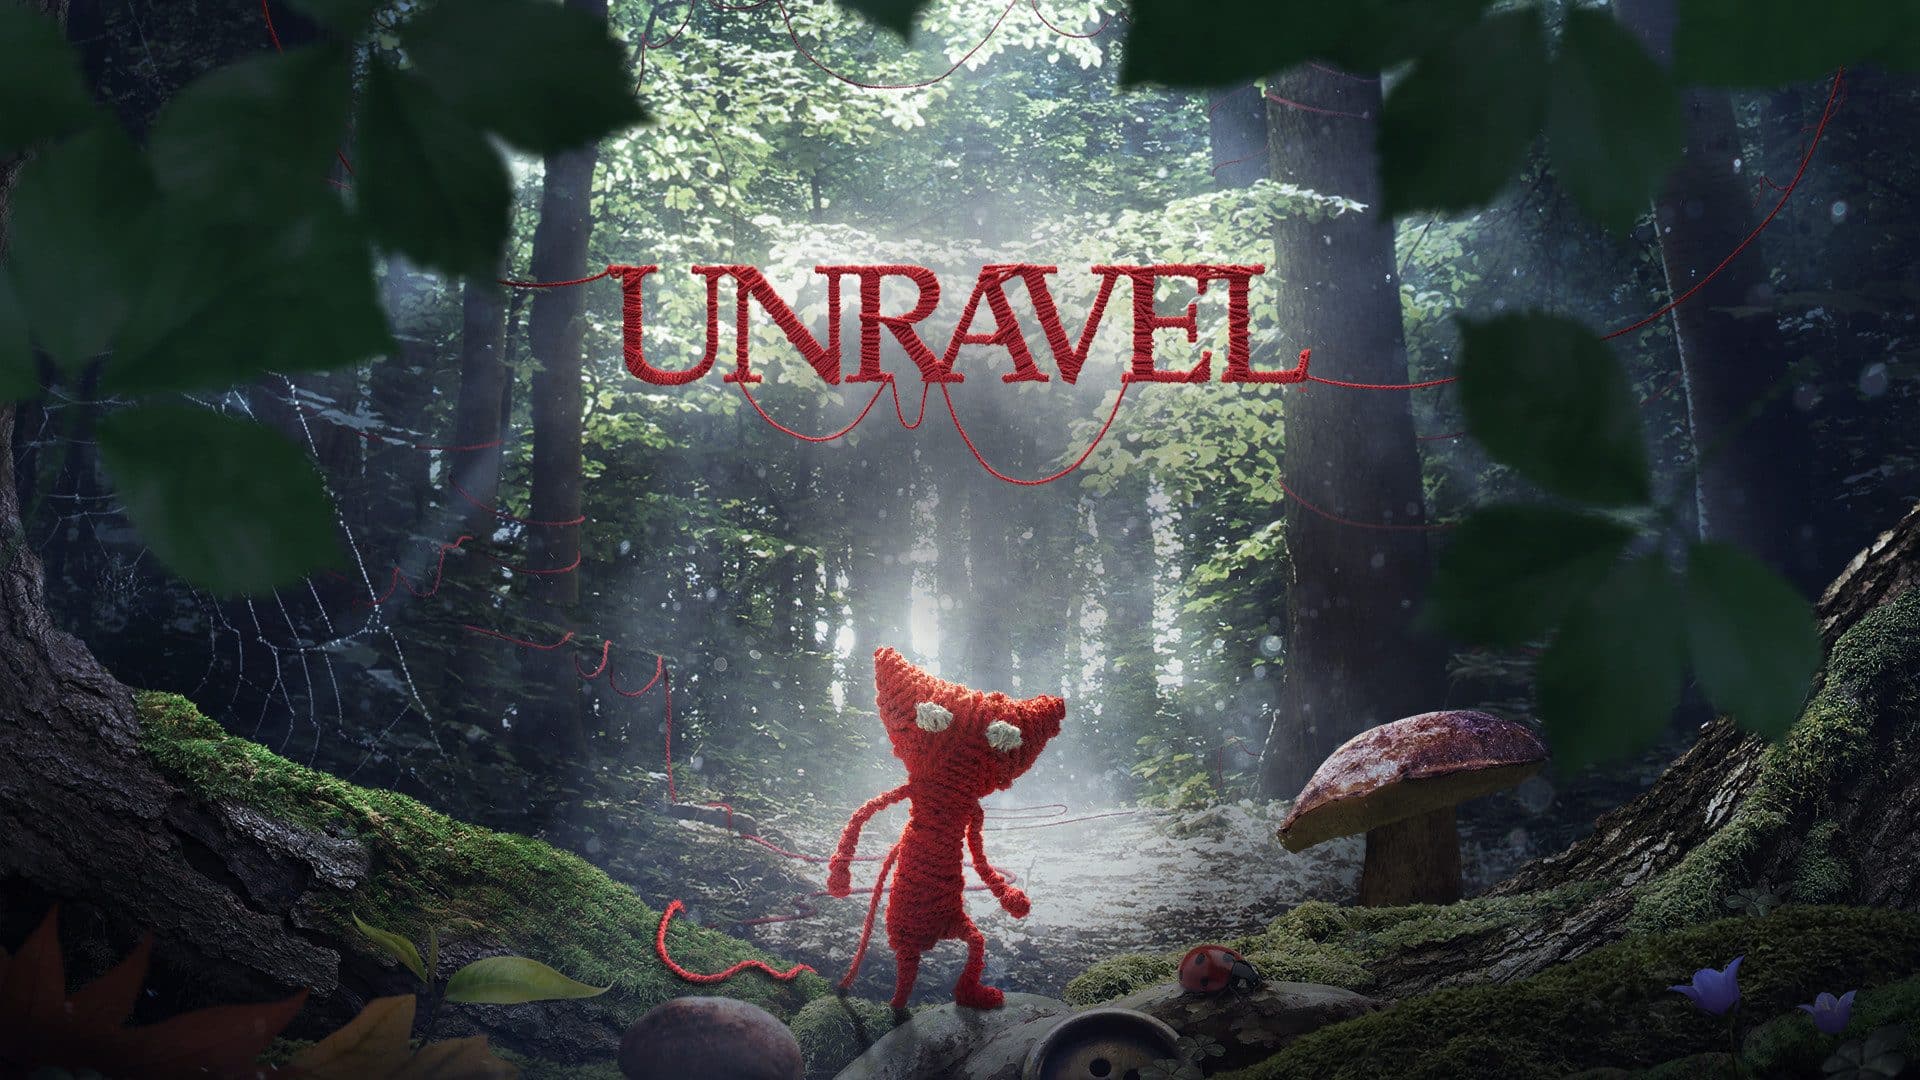 Unravel Two Review  Gaming History 101